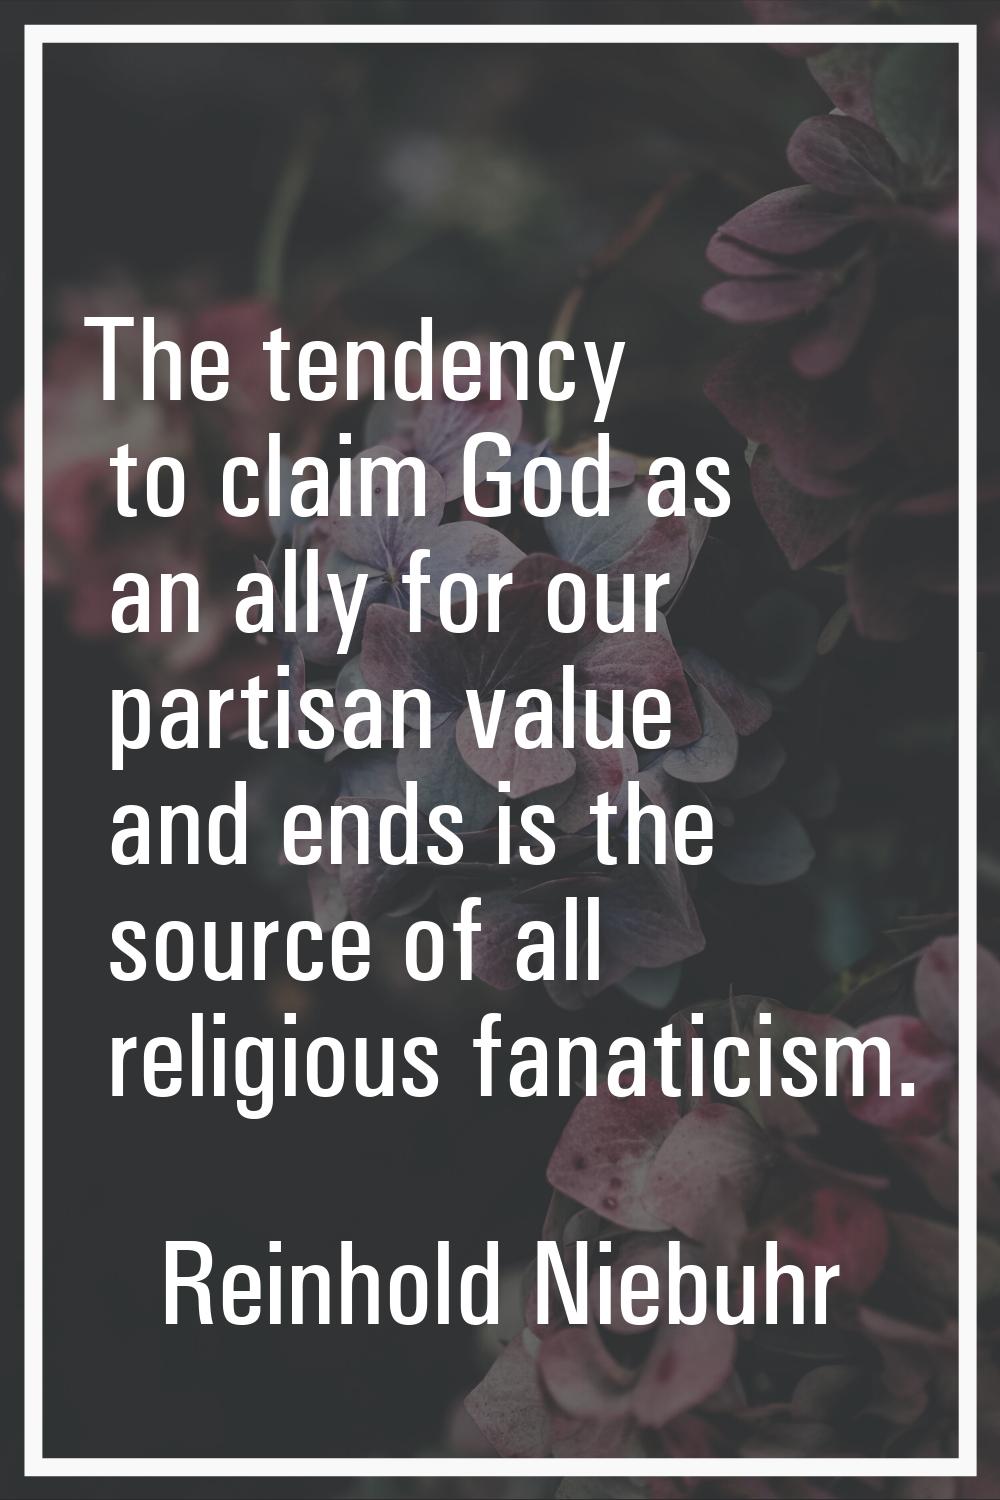 The tendency to claim God as an ally for our partisan value and ends is the source of all religious